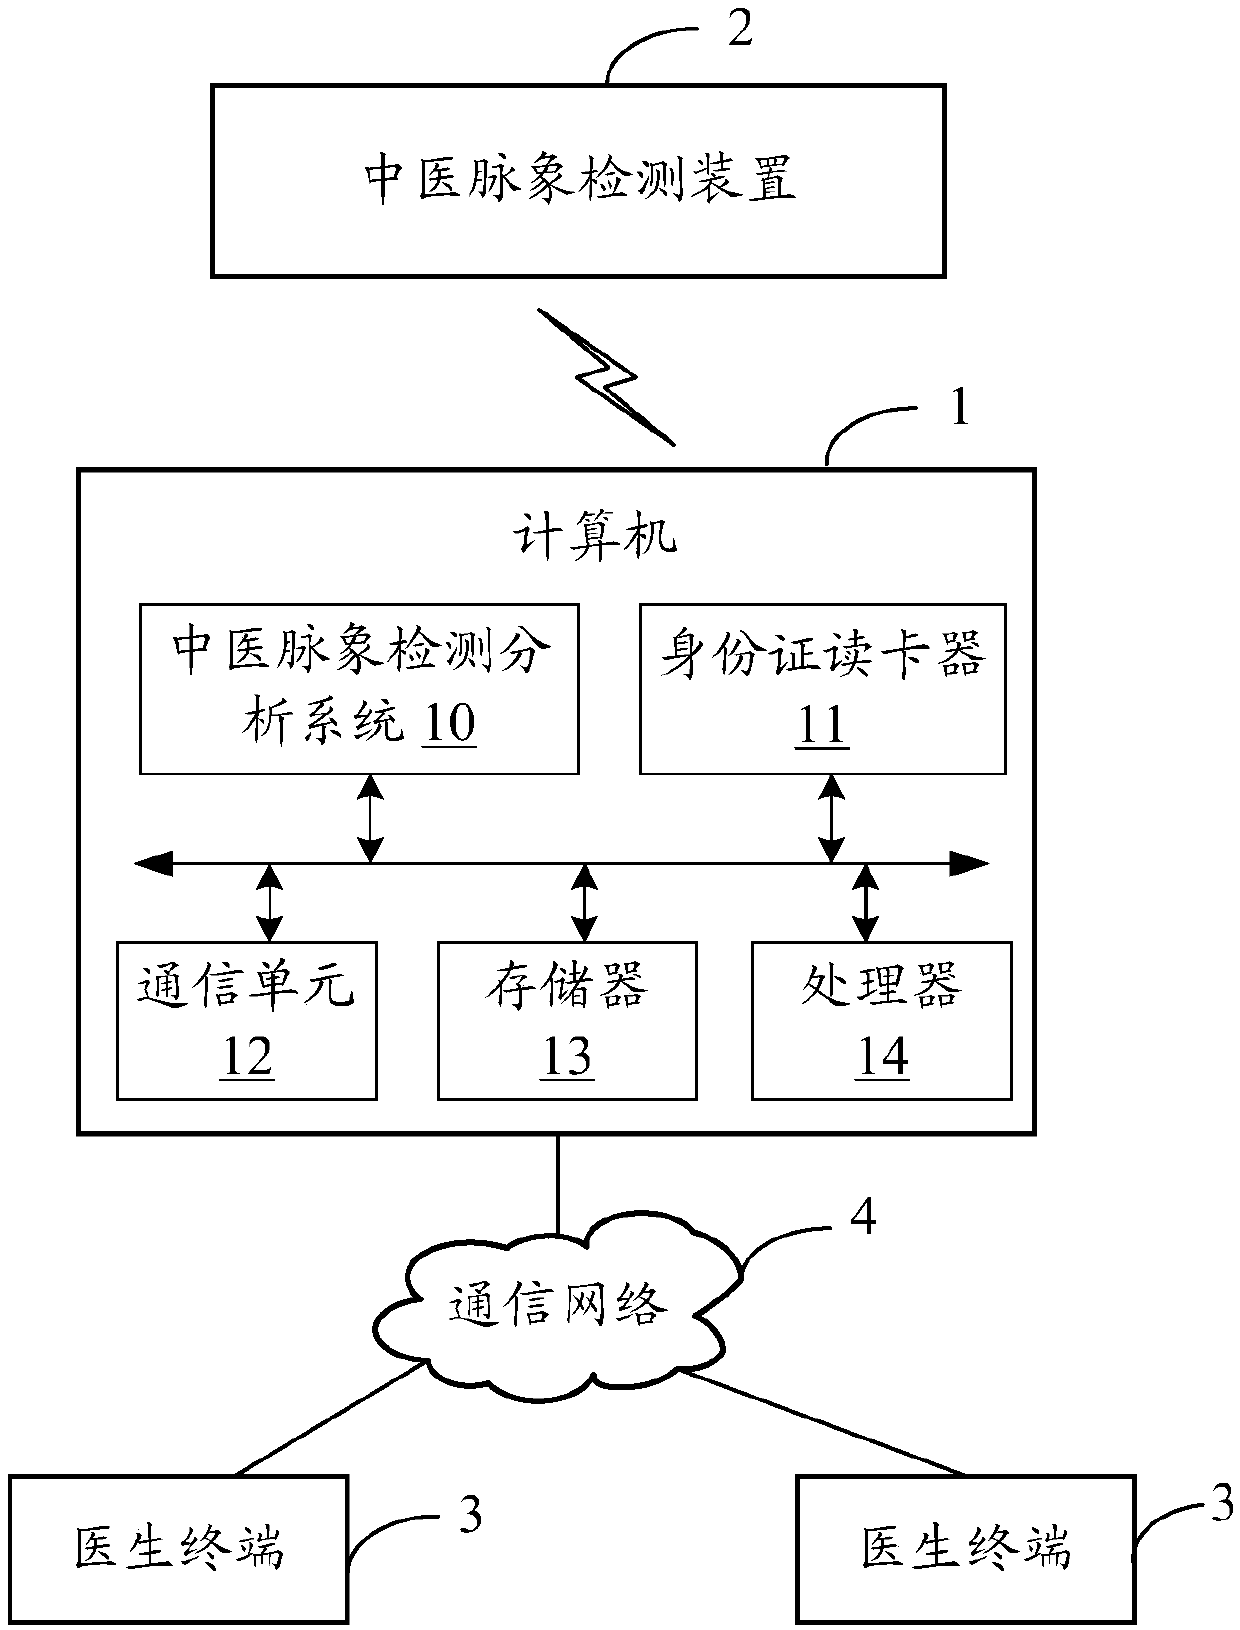 Traditional-Chinese-medicine pulse detection and analysis system, and traditional-Chinese-medicine pulse detection and analysis method